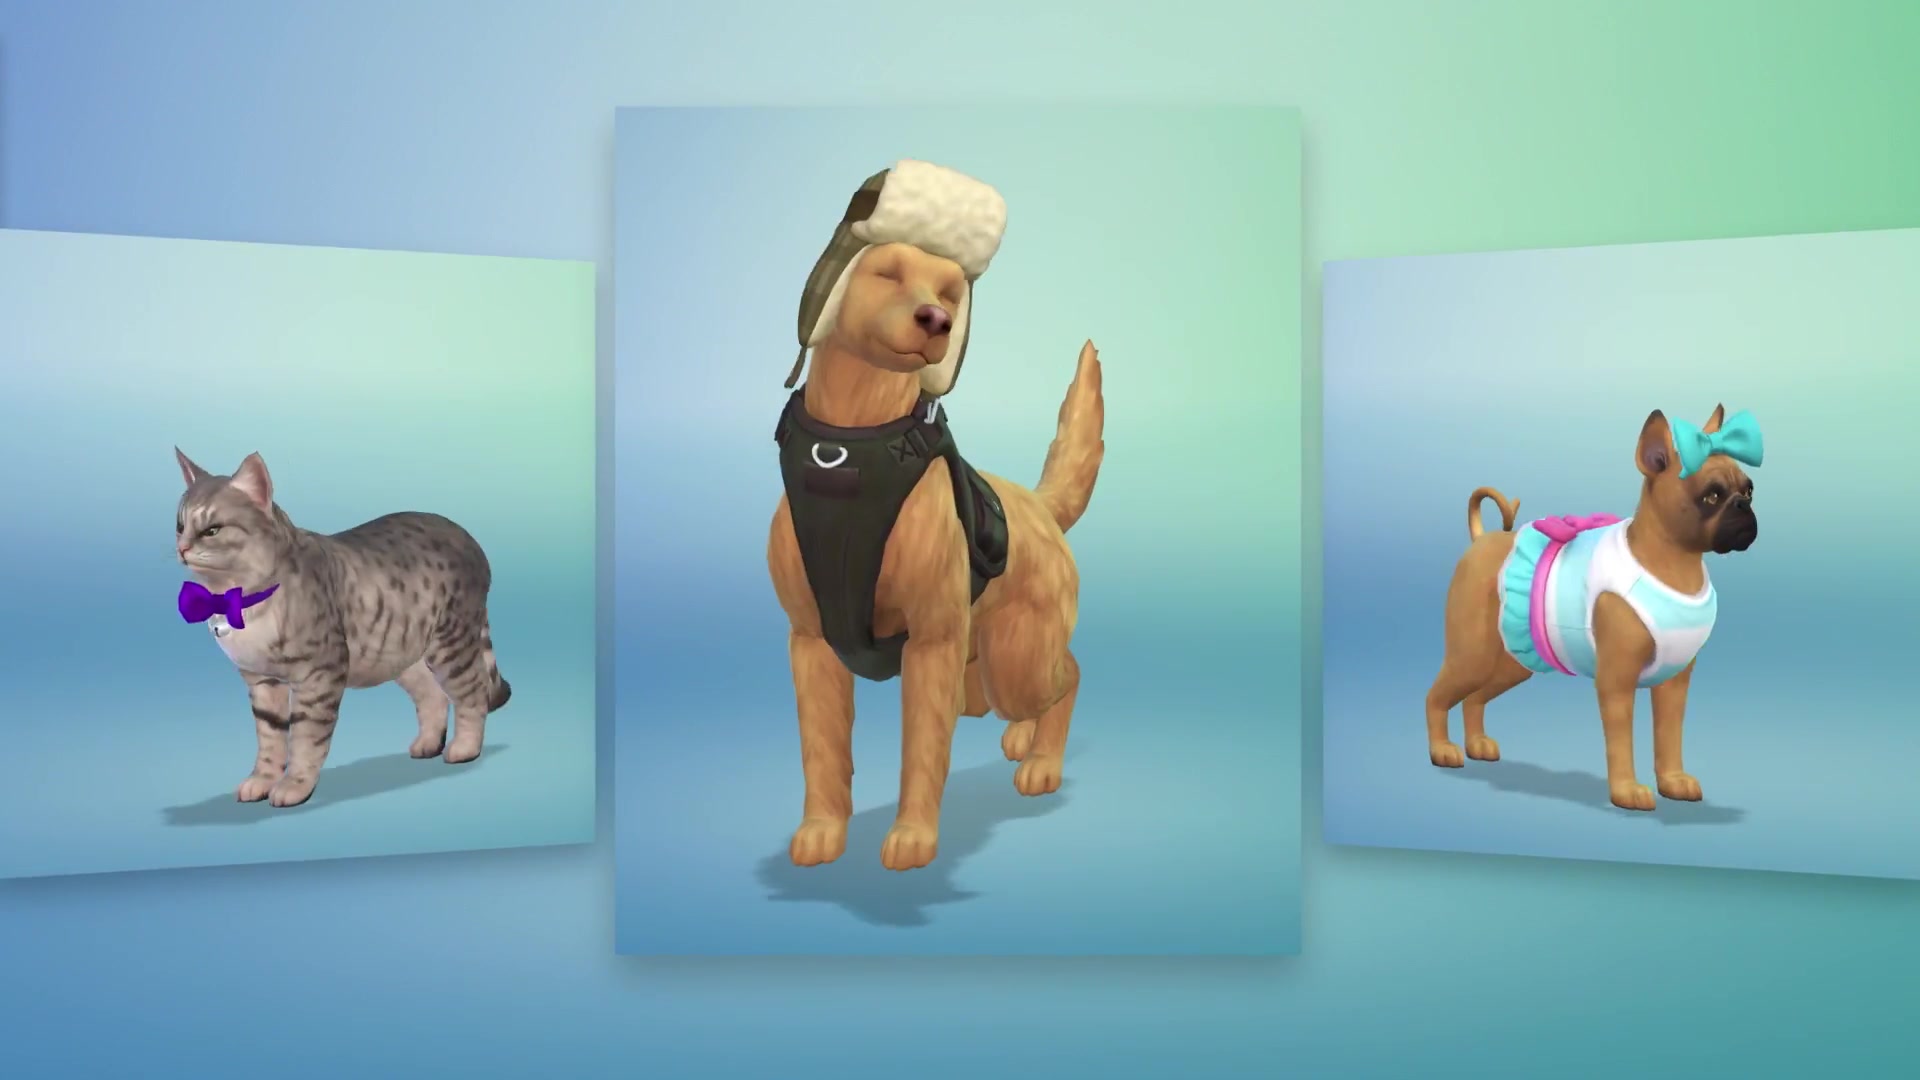 The Sims 4 Cats & Dogs- Create A Pet Official Gameplay Trailer 1366 ...